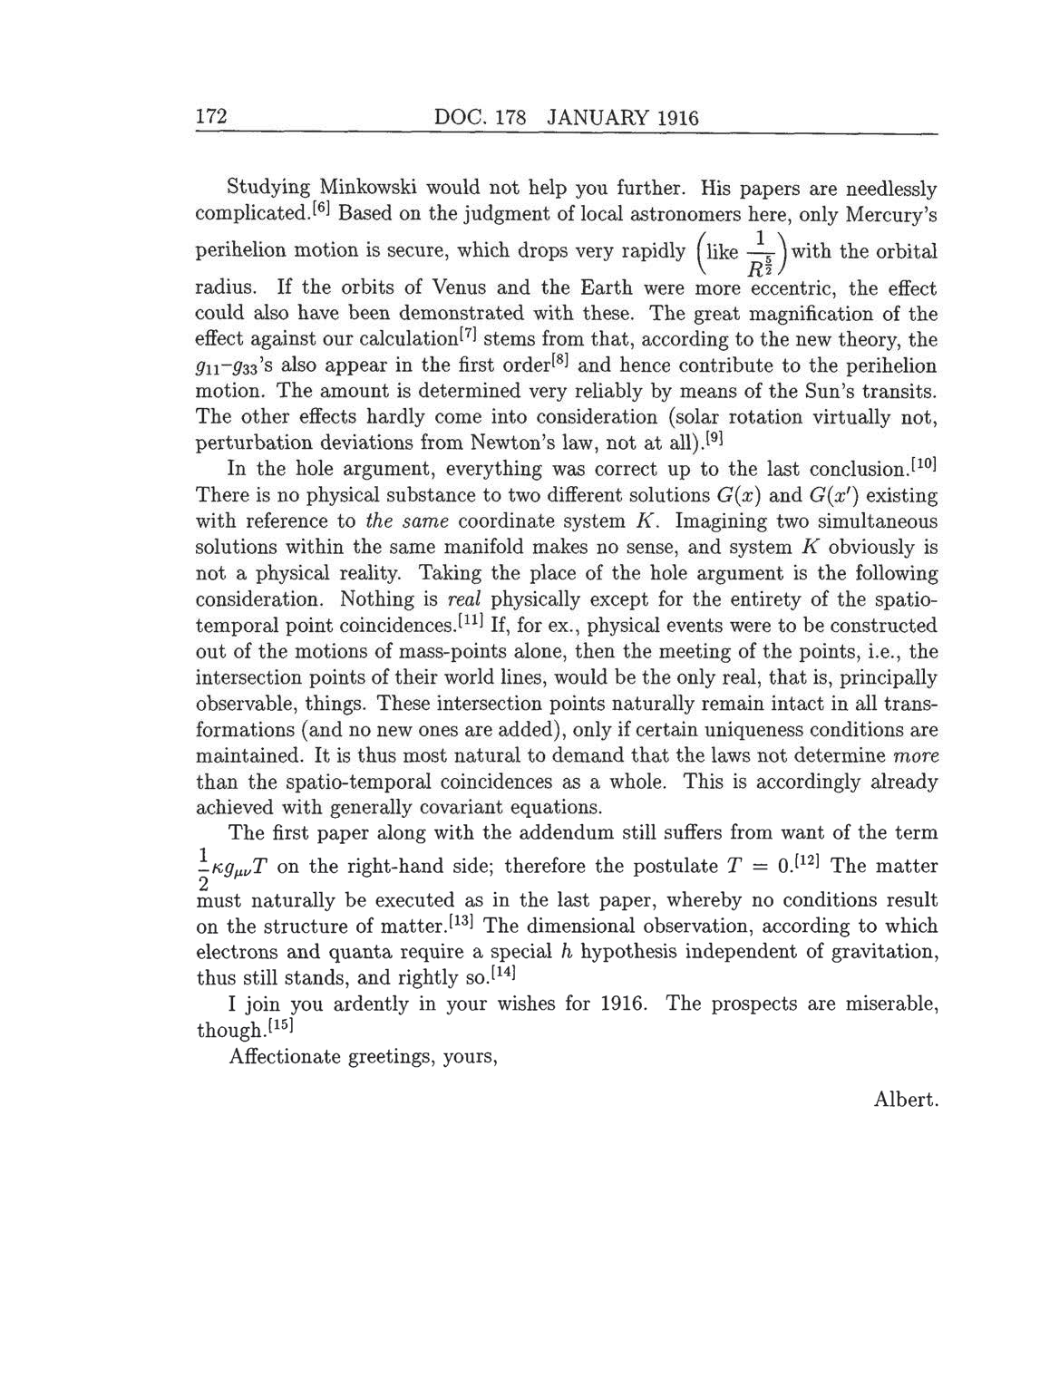 Volume 8: The Berlin Years: Correspondence, 1914-1918 (English translation supplement) page 172